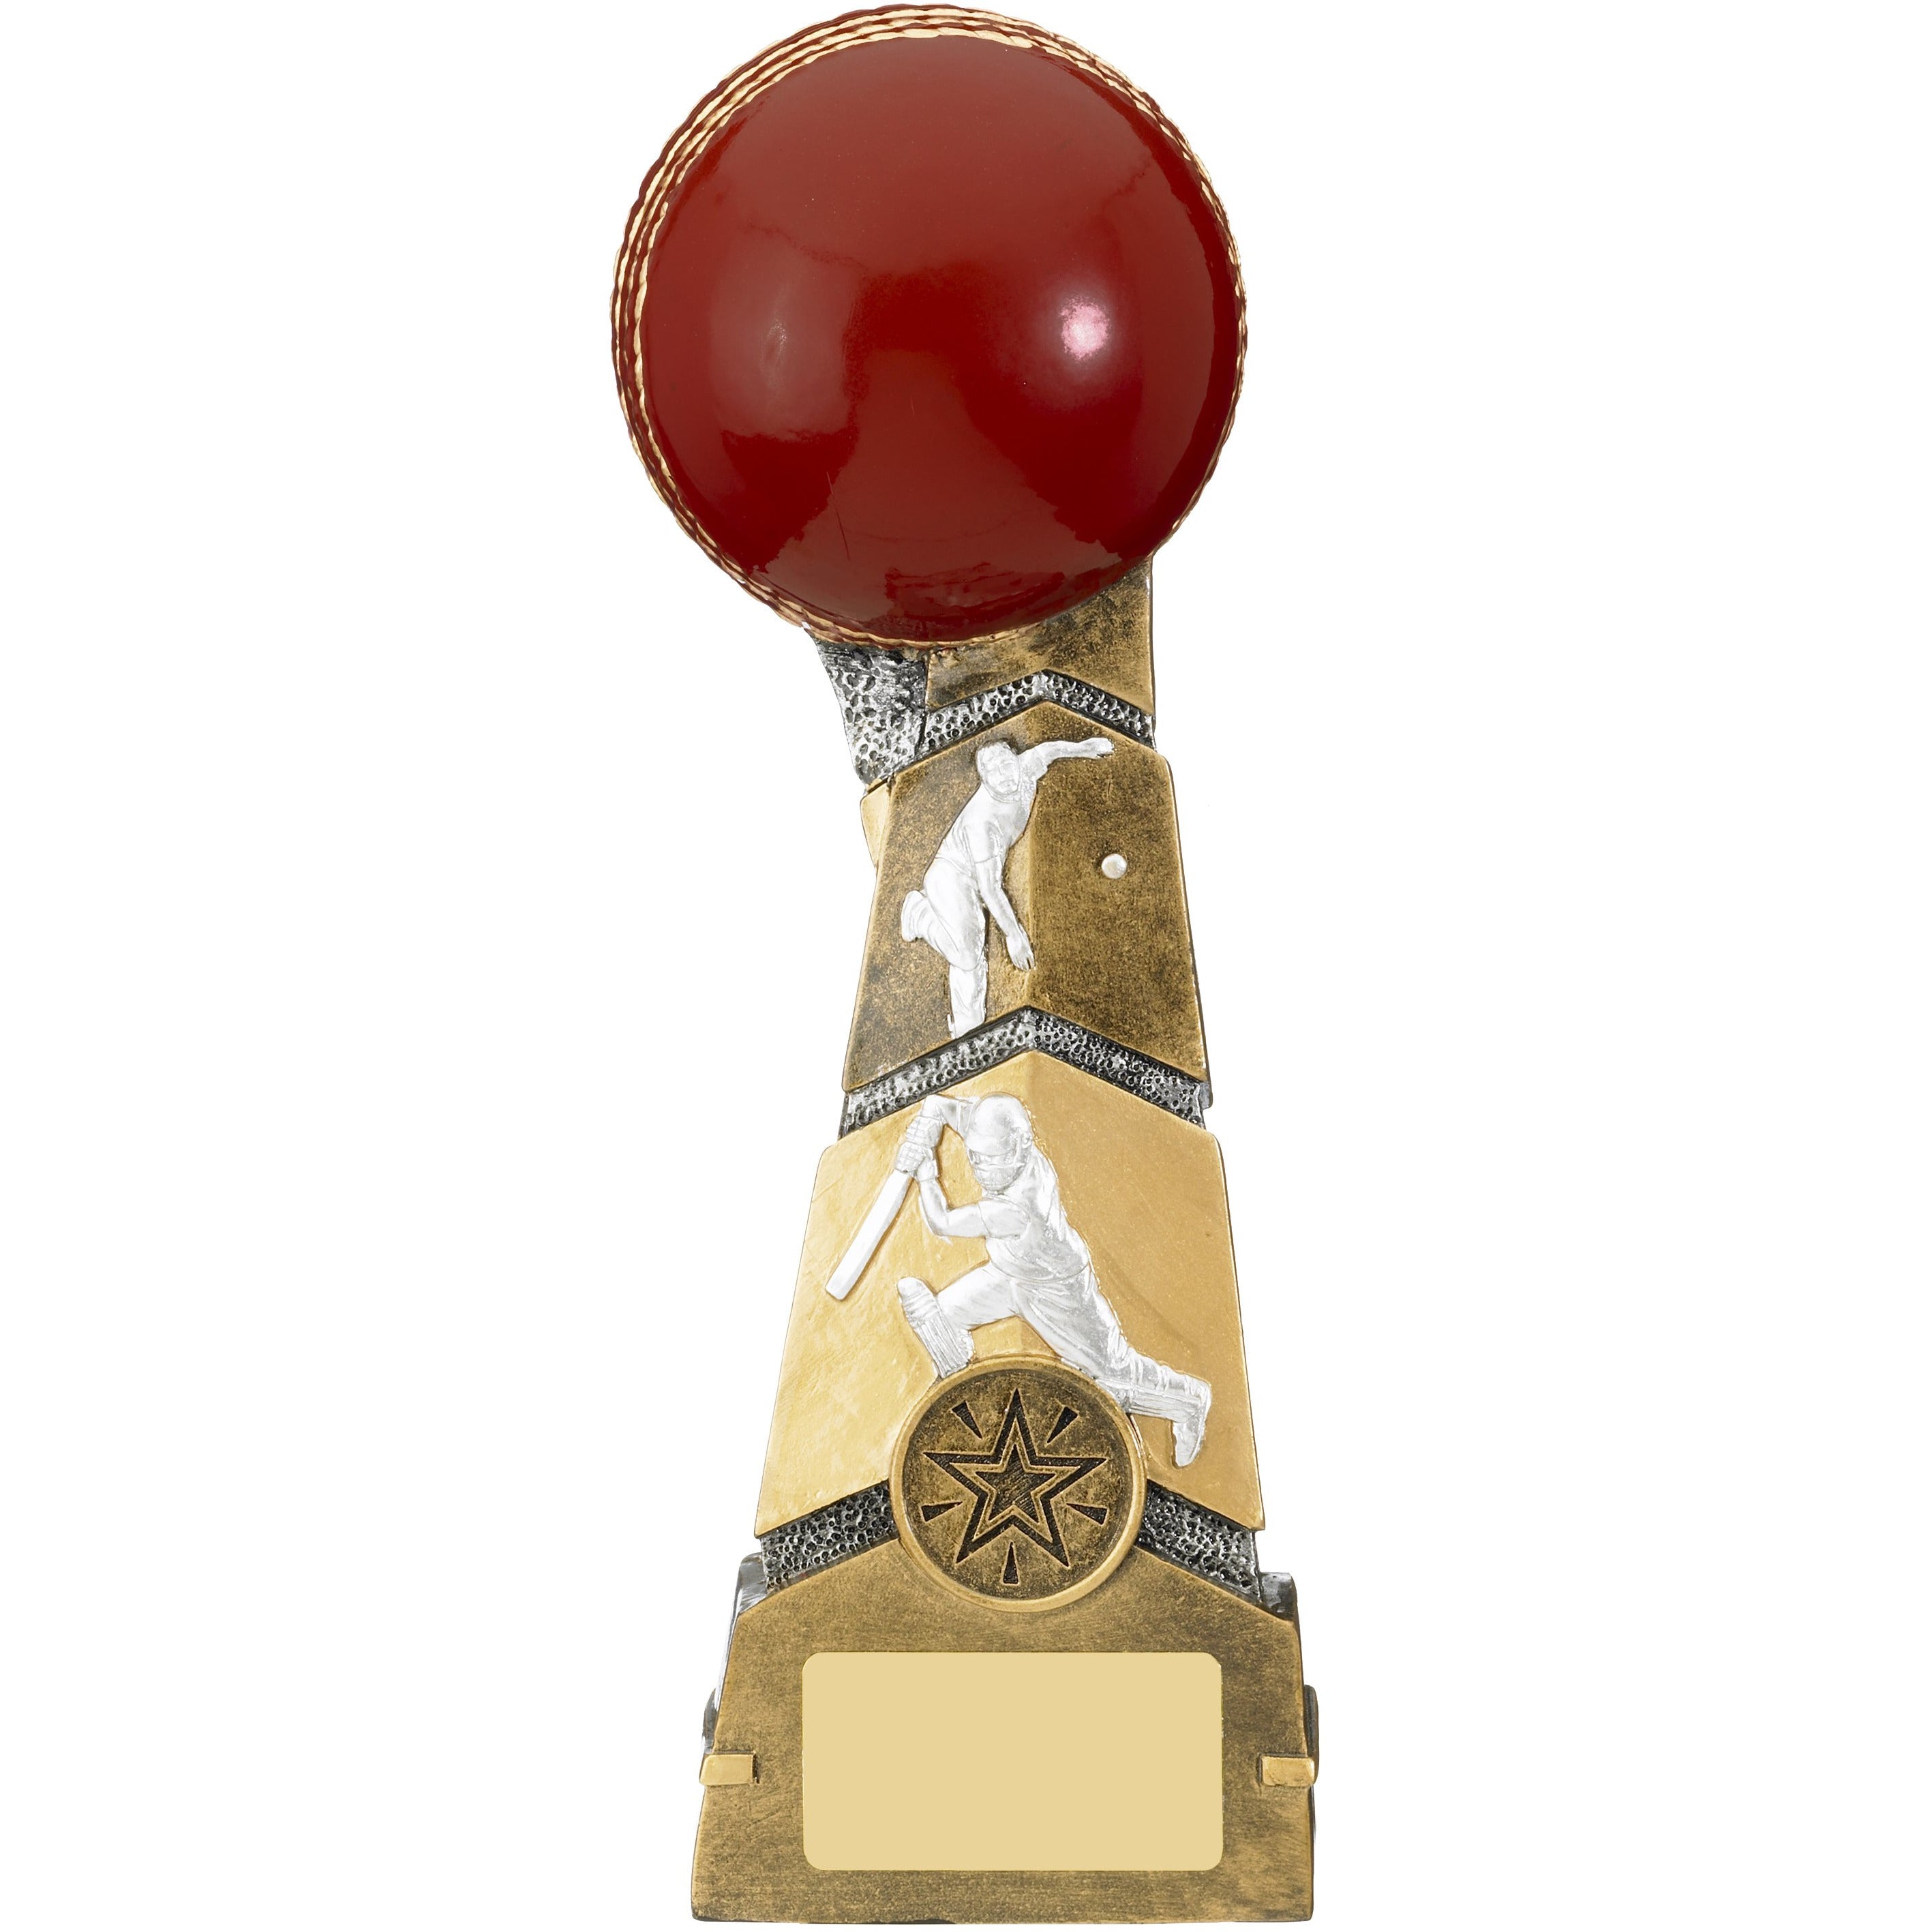 Forza Cricket Ball Statue Trophy